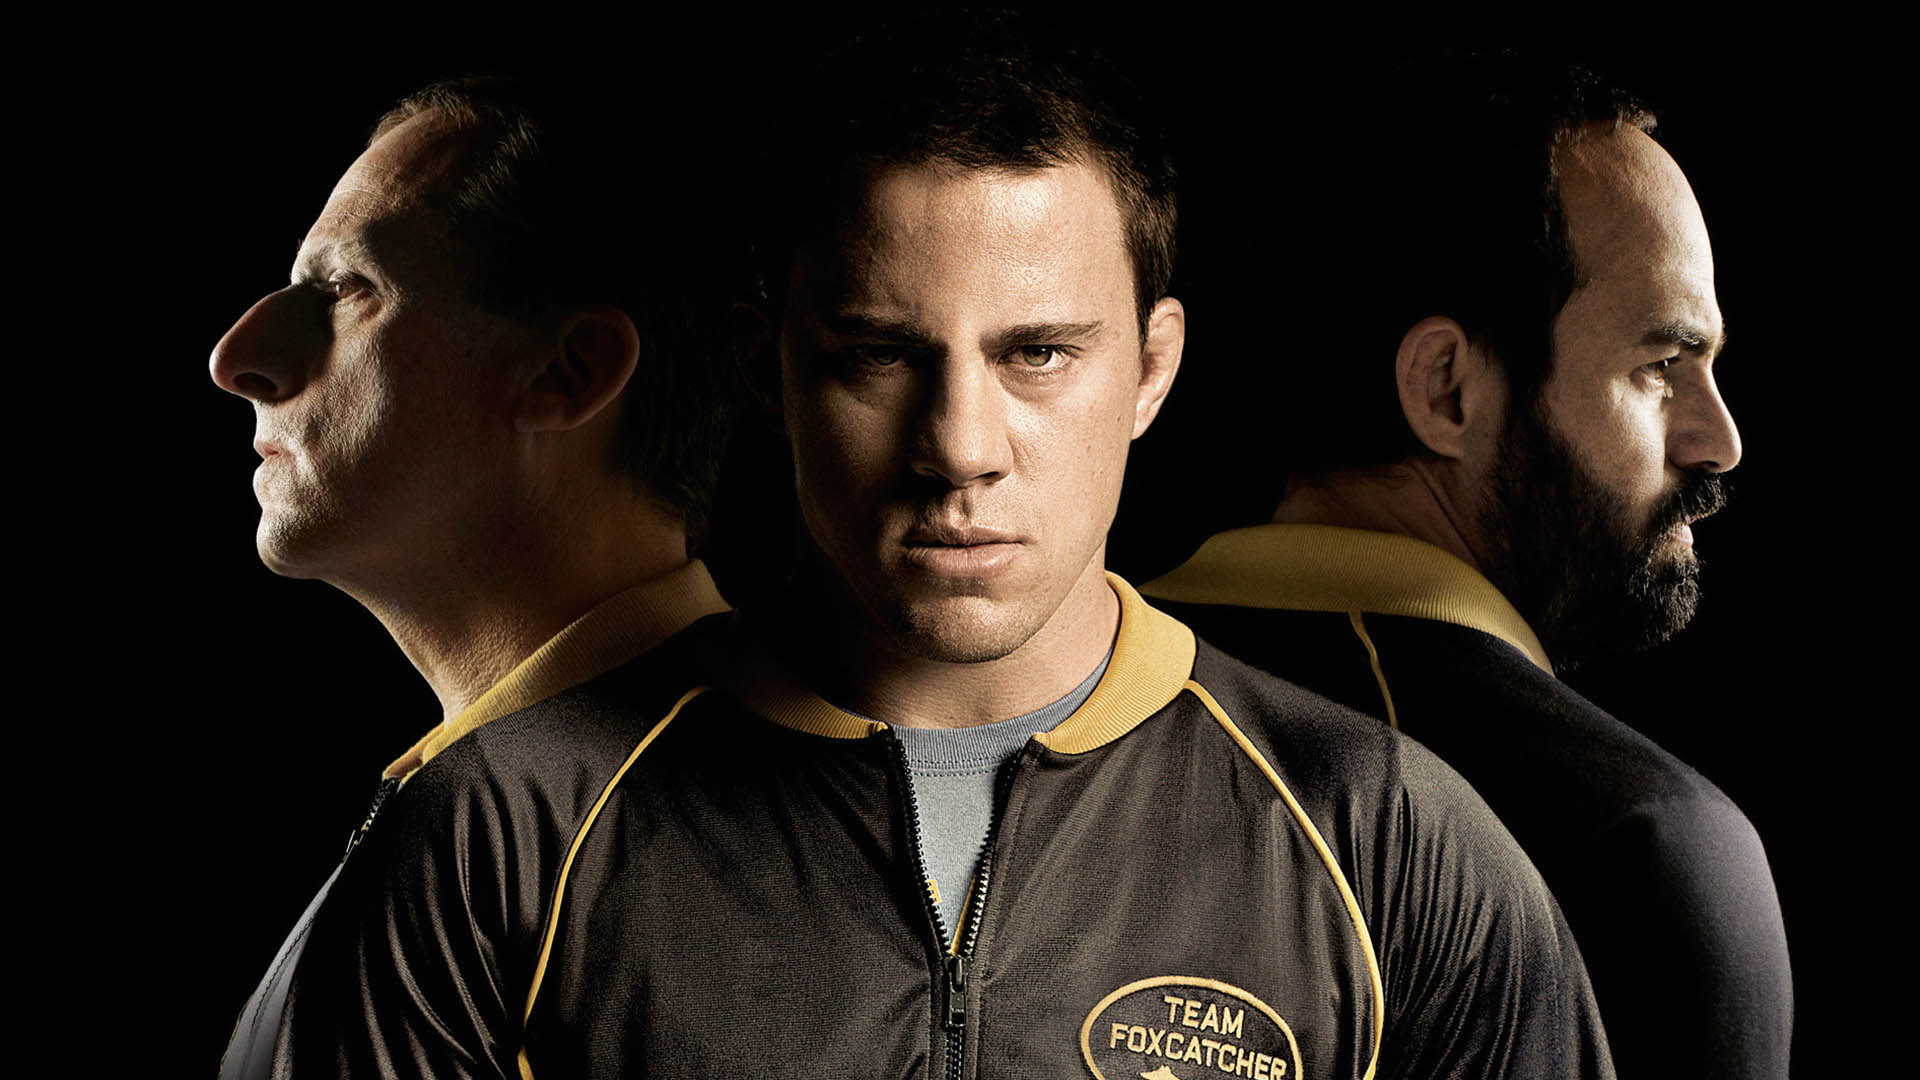 The main characters of the movie Foxcatcher in the movie cover of this movie